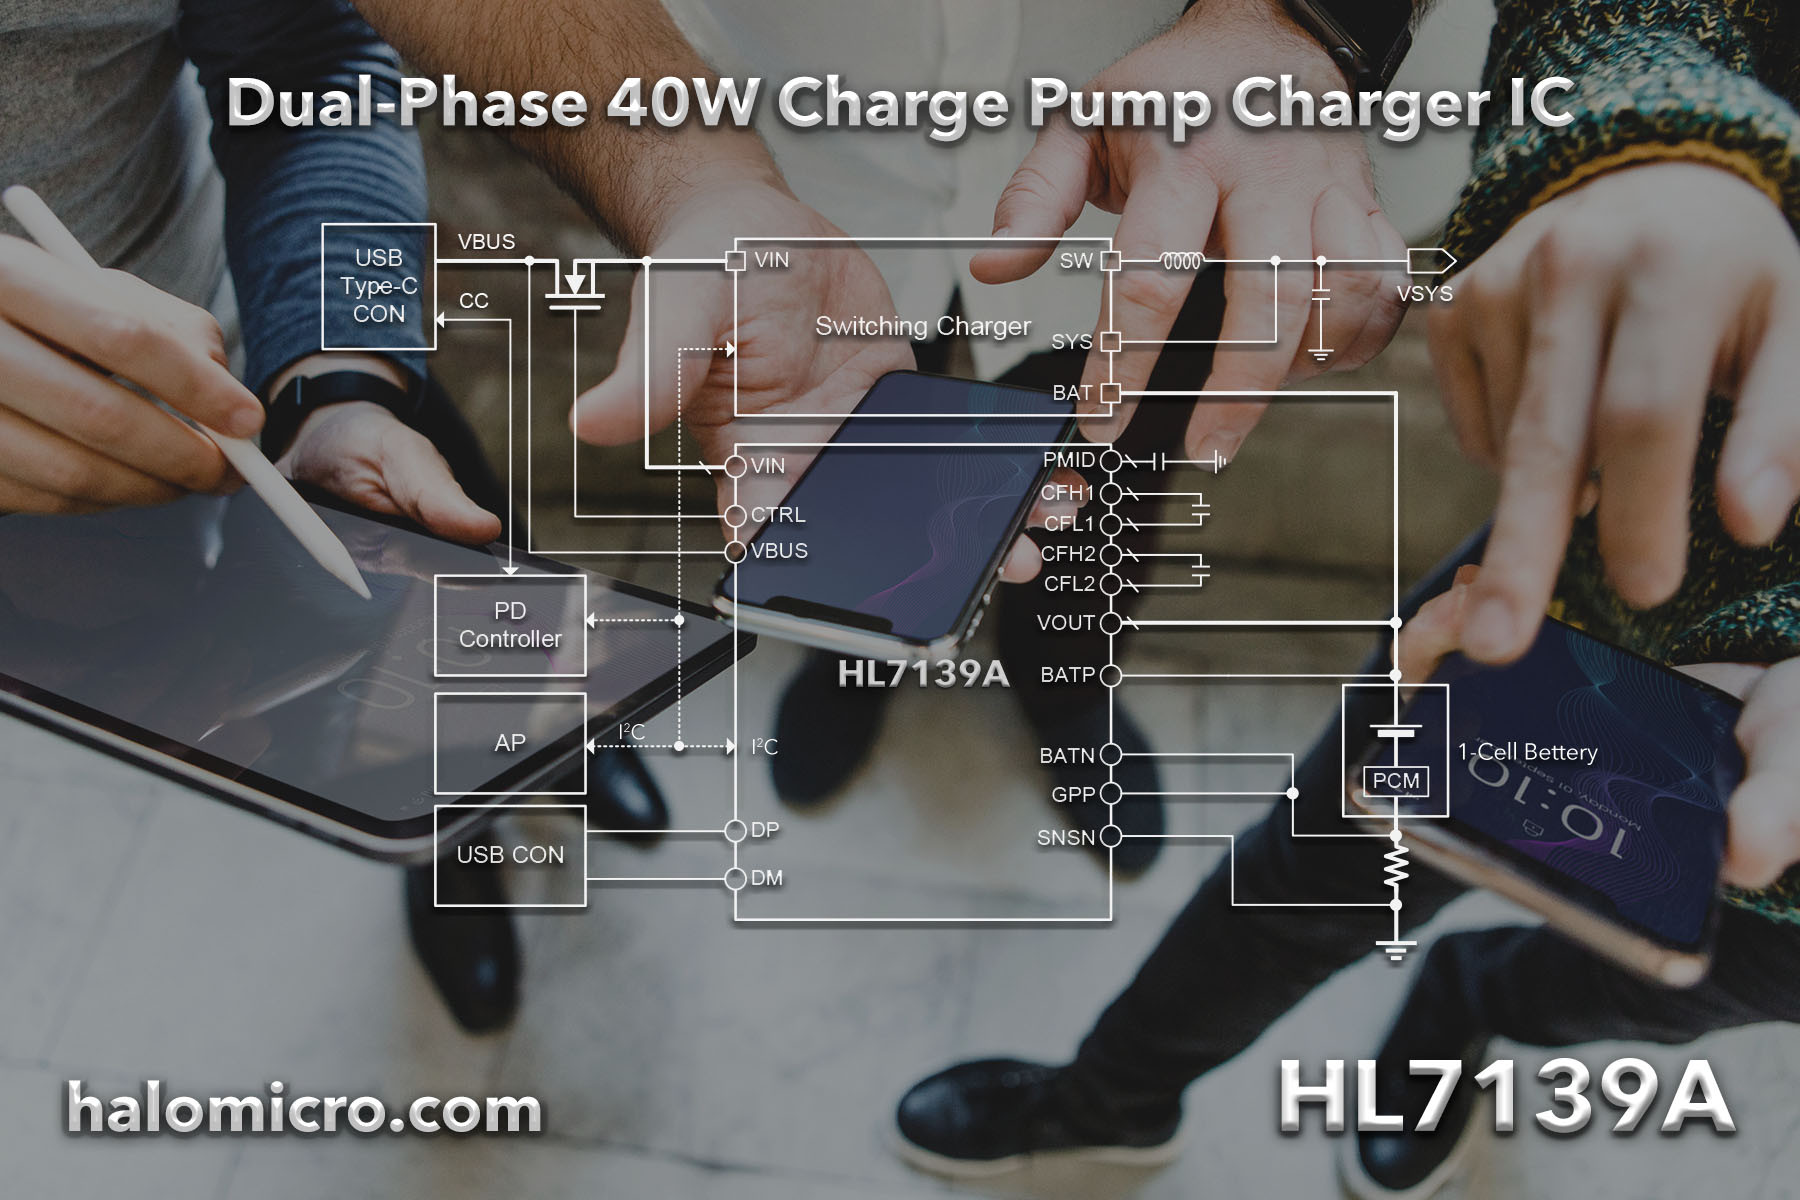 Halo Microelectronics Introduces a New Dual-Phase 40W Charge Pump Charger IC